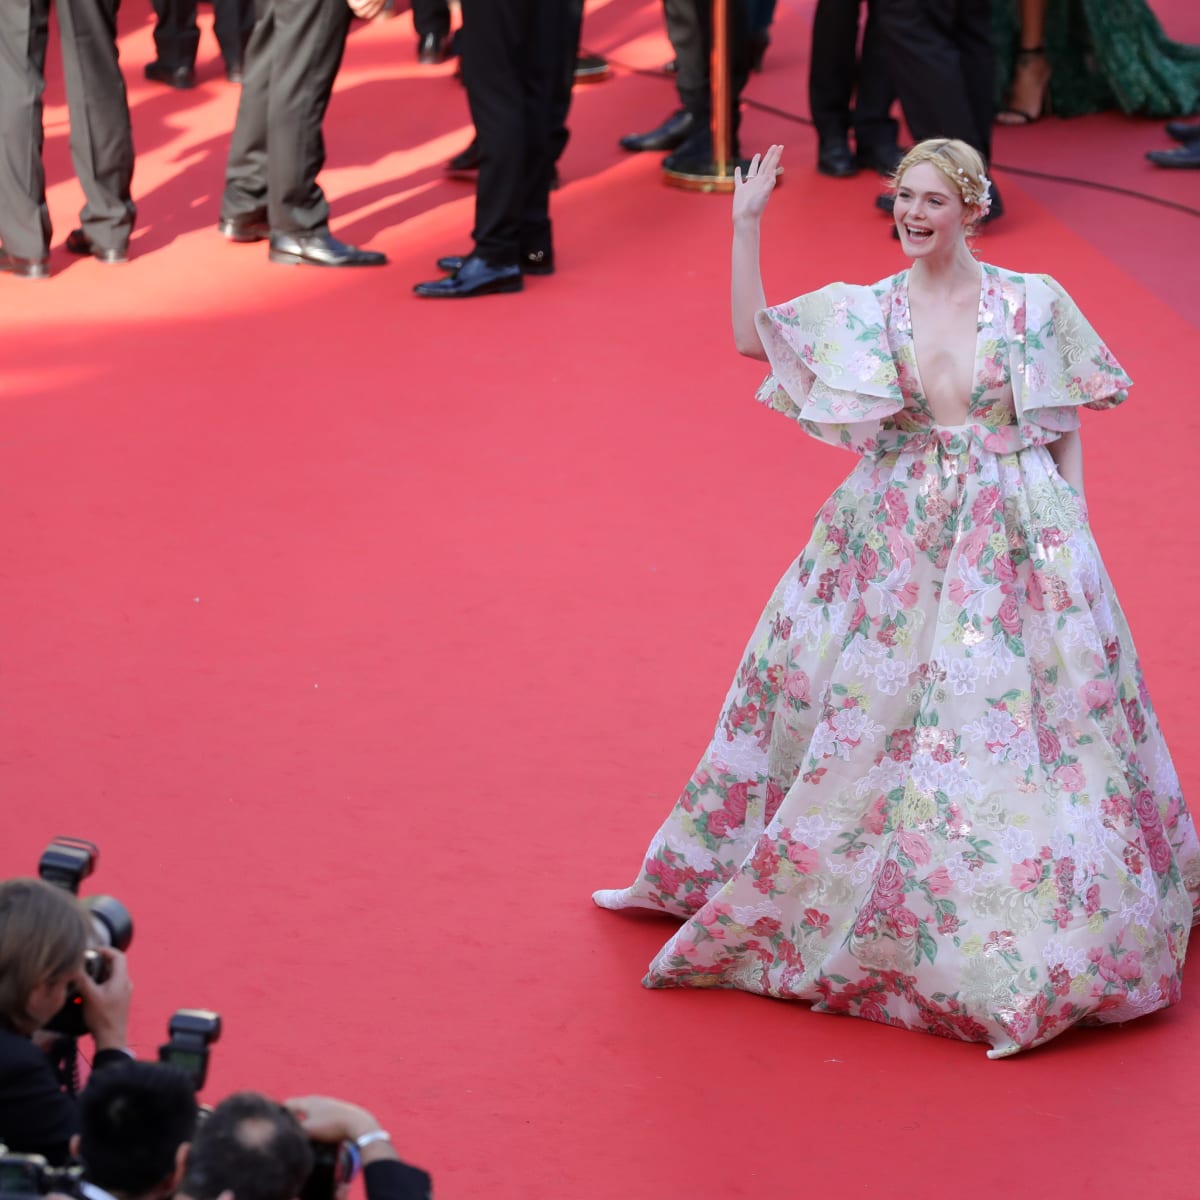 Elle Fanning is the 2019 Cannes Film Festival's best-dressed star